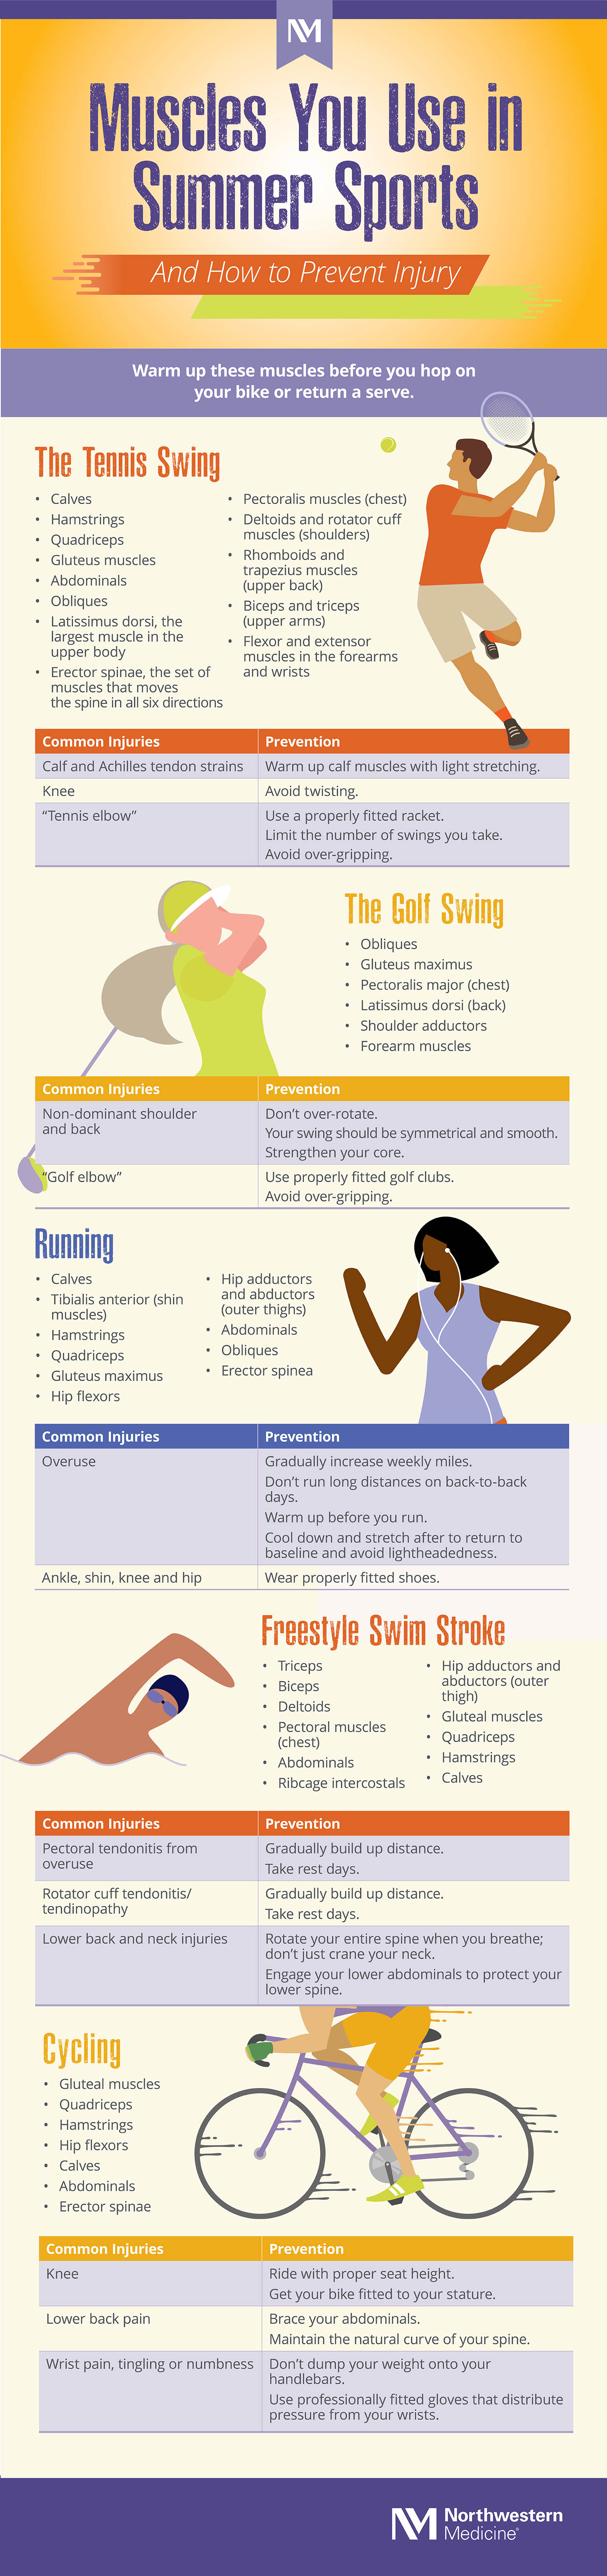 nm-muscles-you-use-in-summer-sports_Infographic